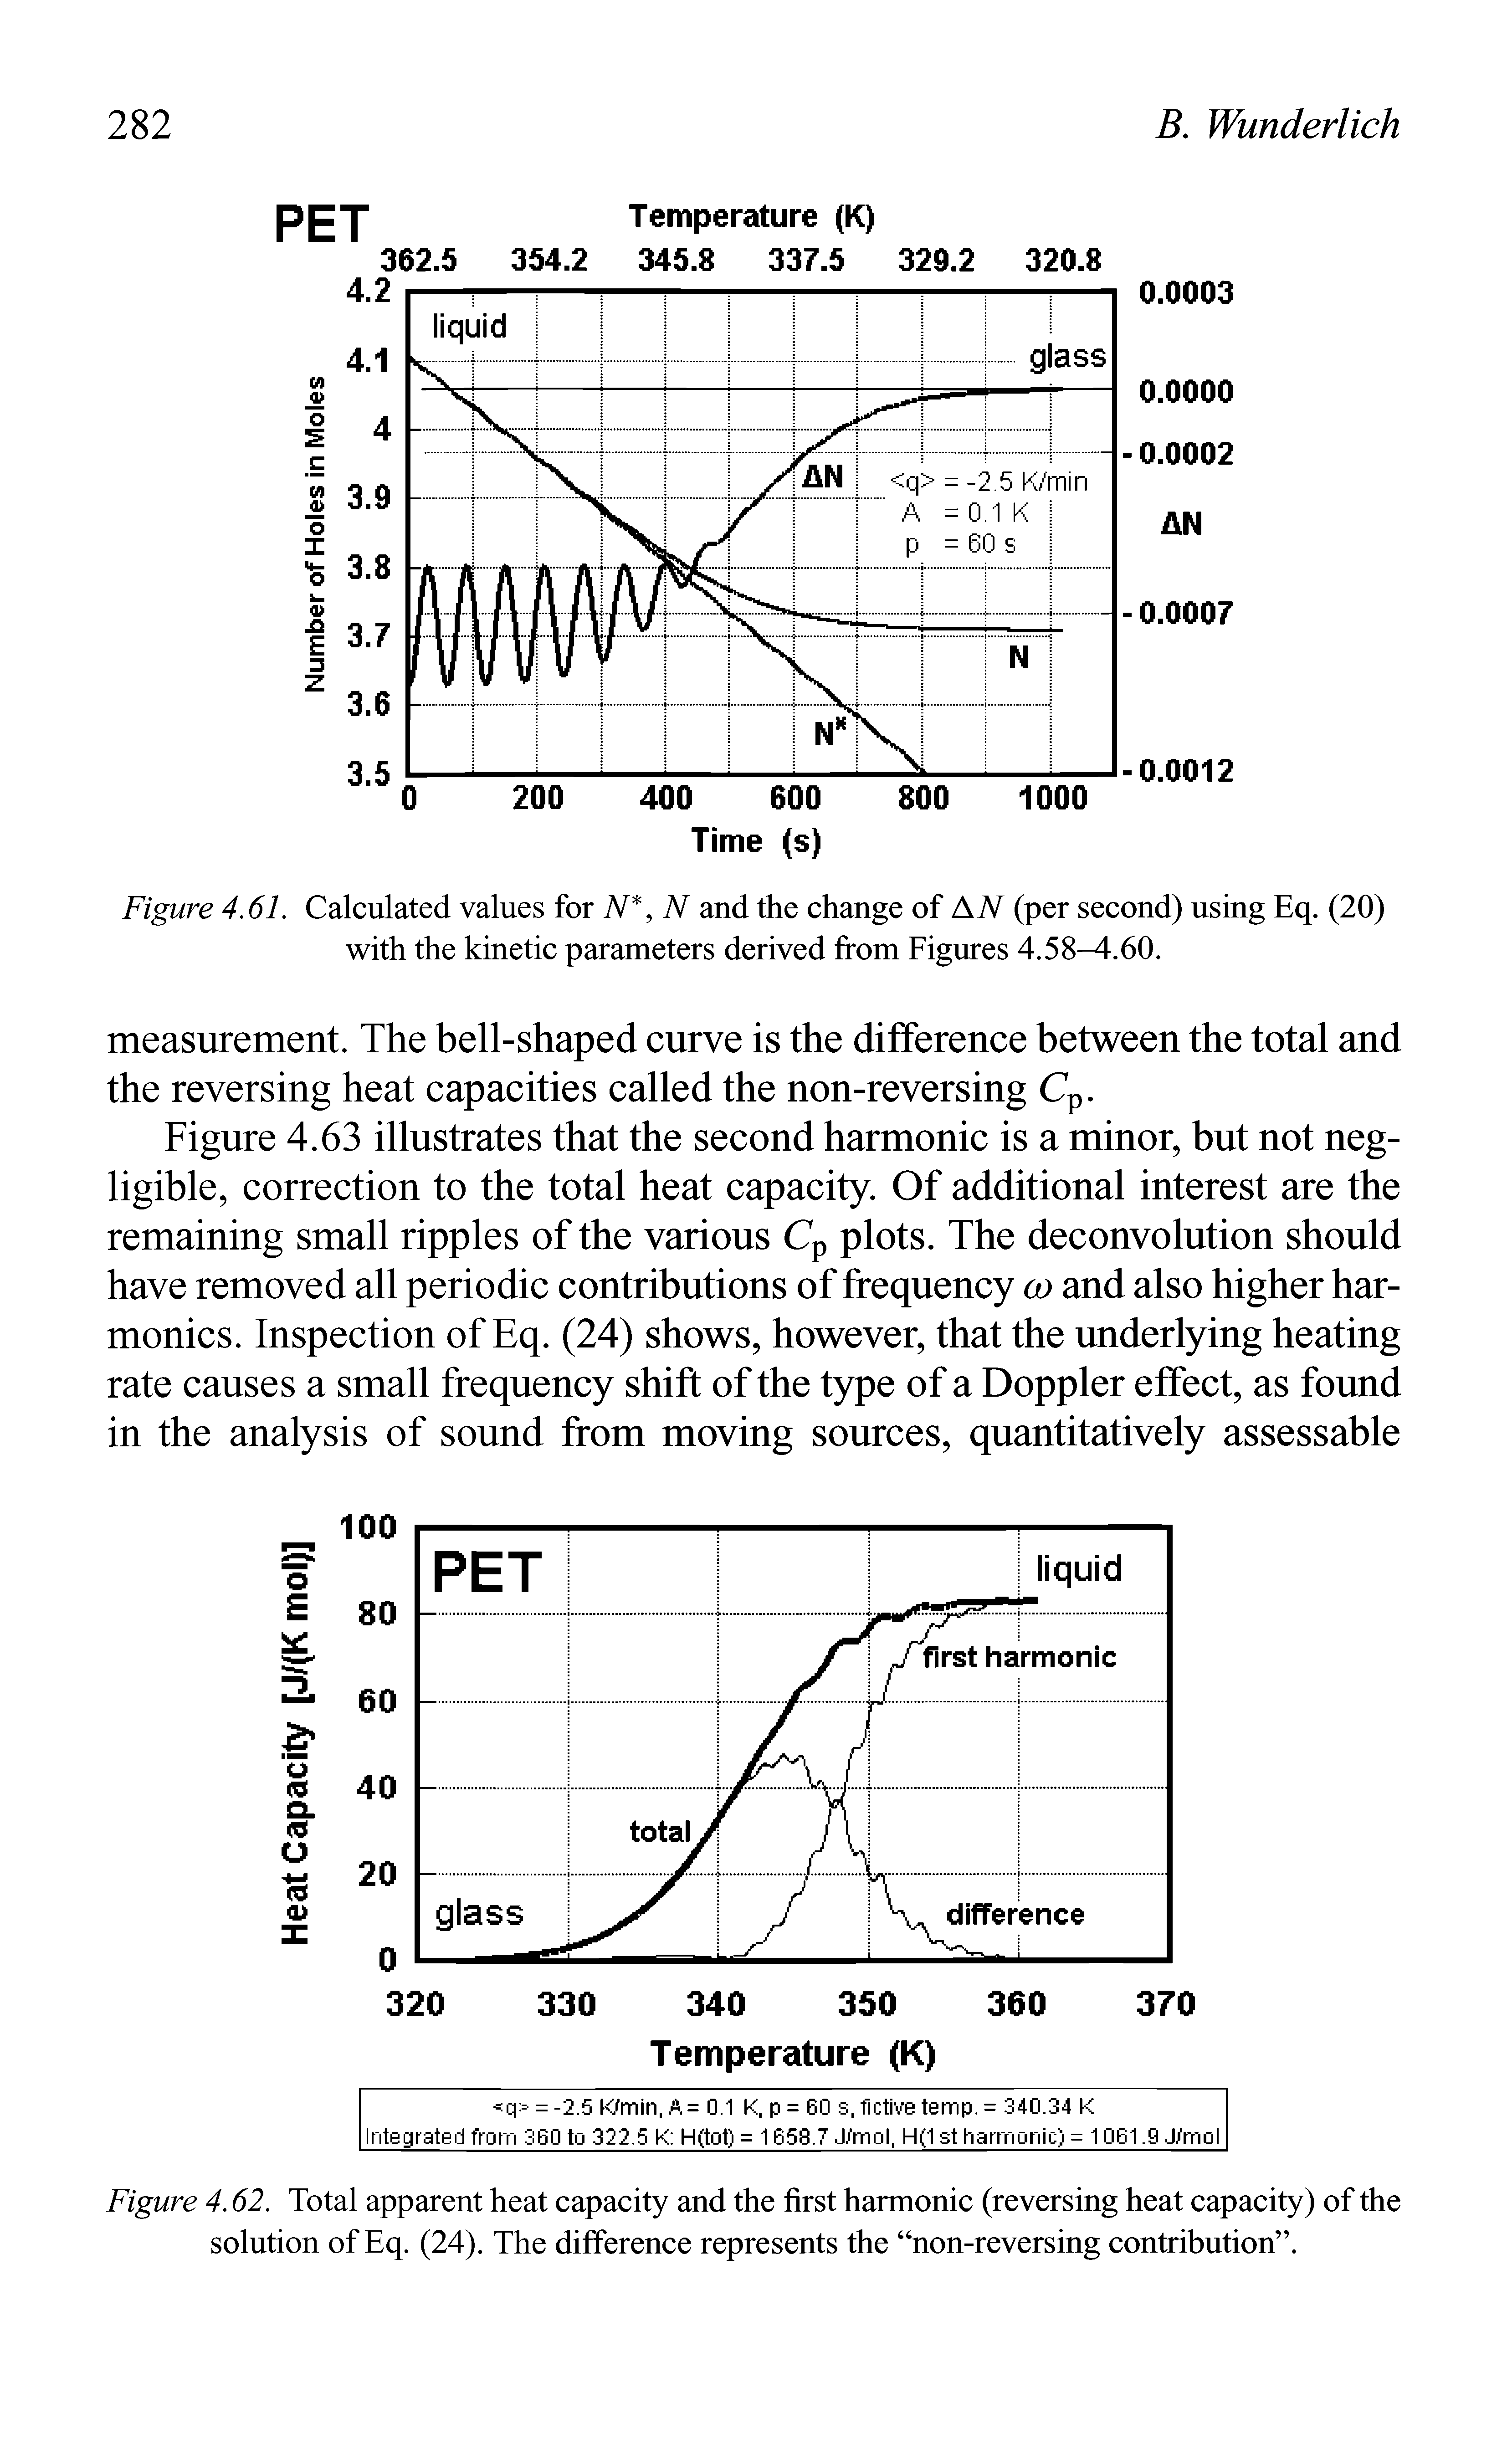 Figure 4.61. Calculated values for N, N and the change of AiV (per second) using Eq. (20) with the kinetic parameters derived from Figures 4.58-4.60.